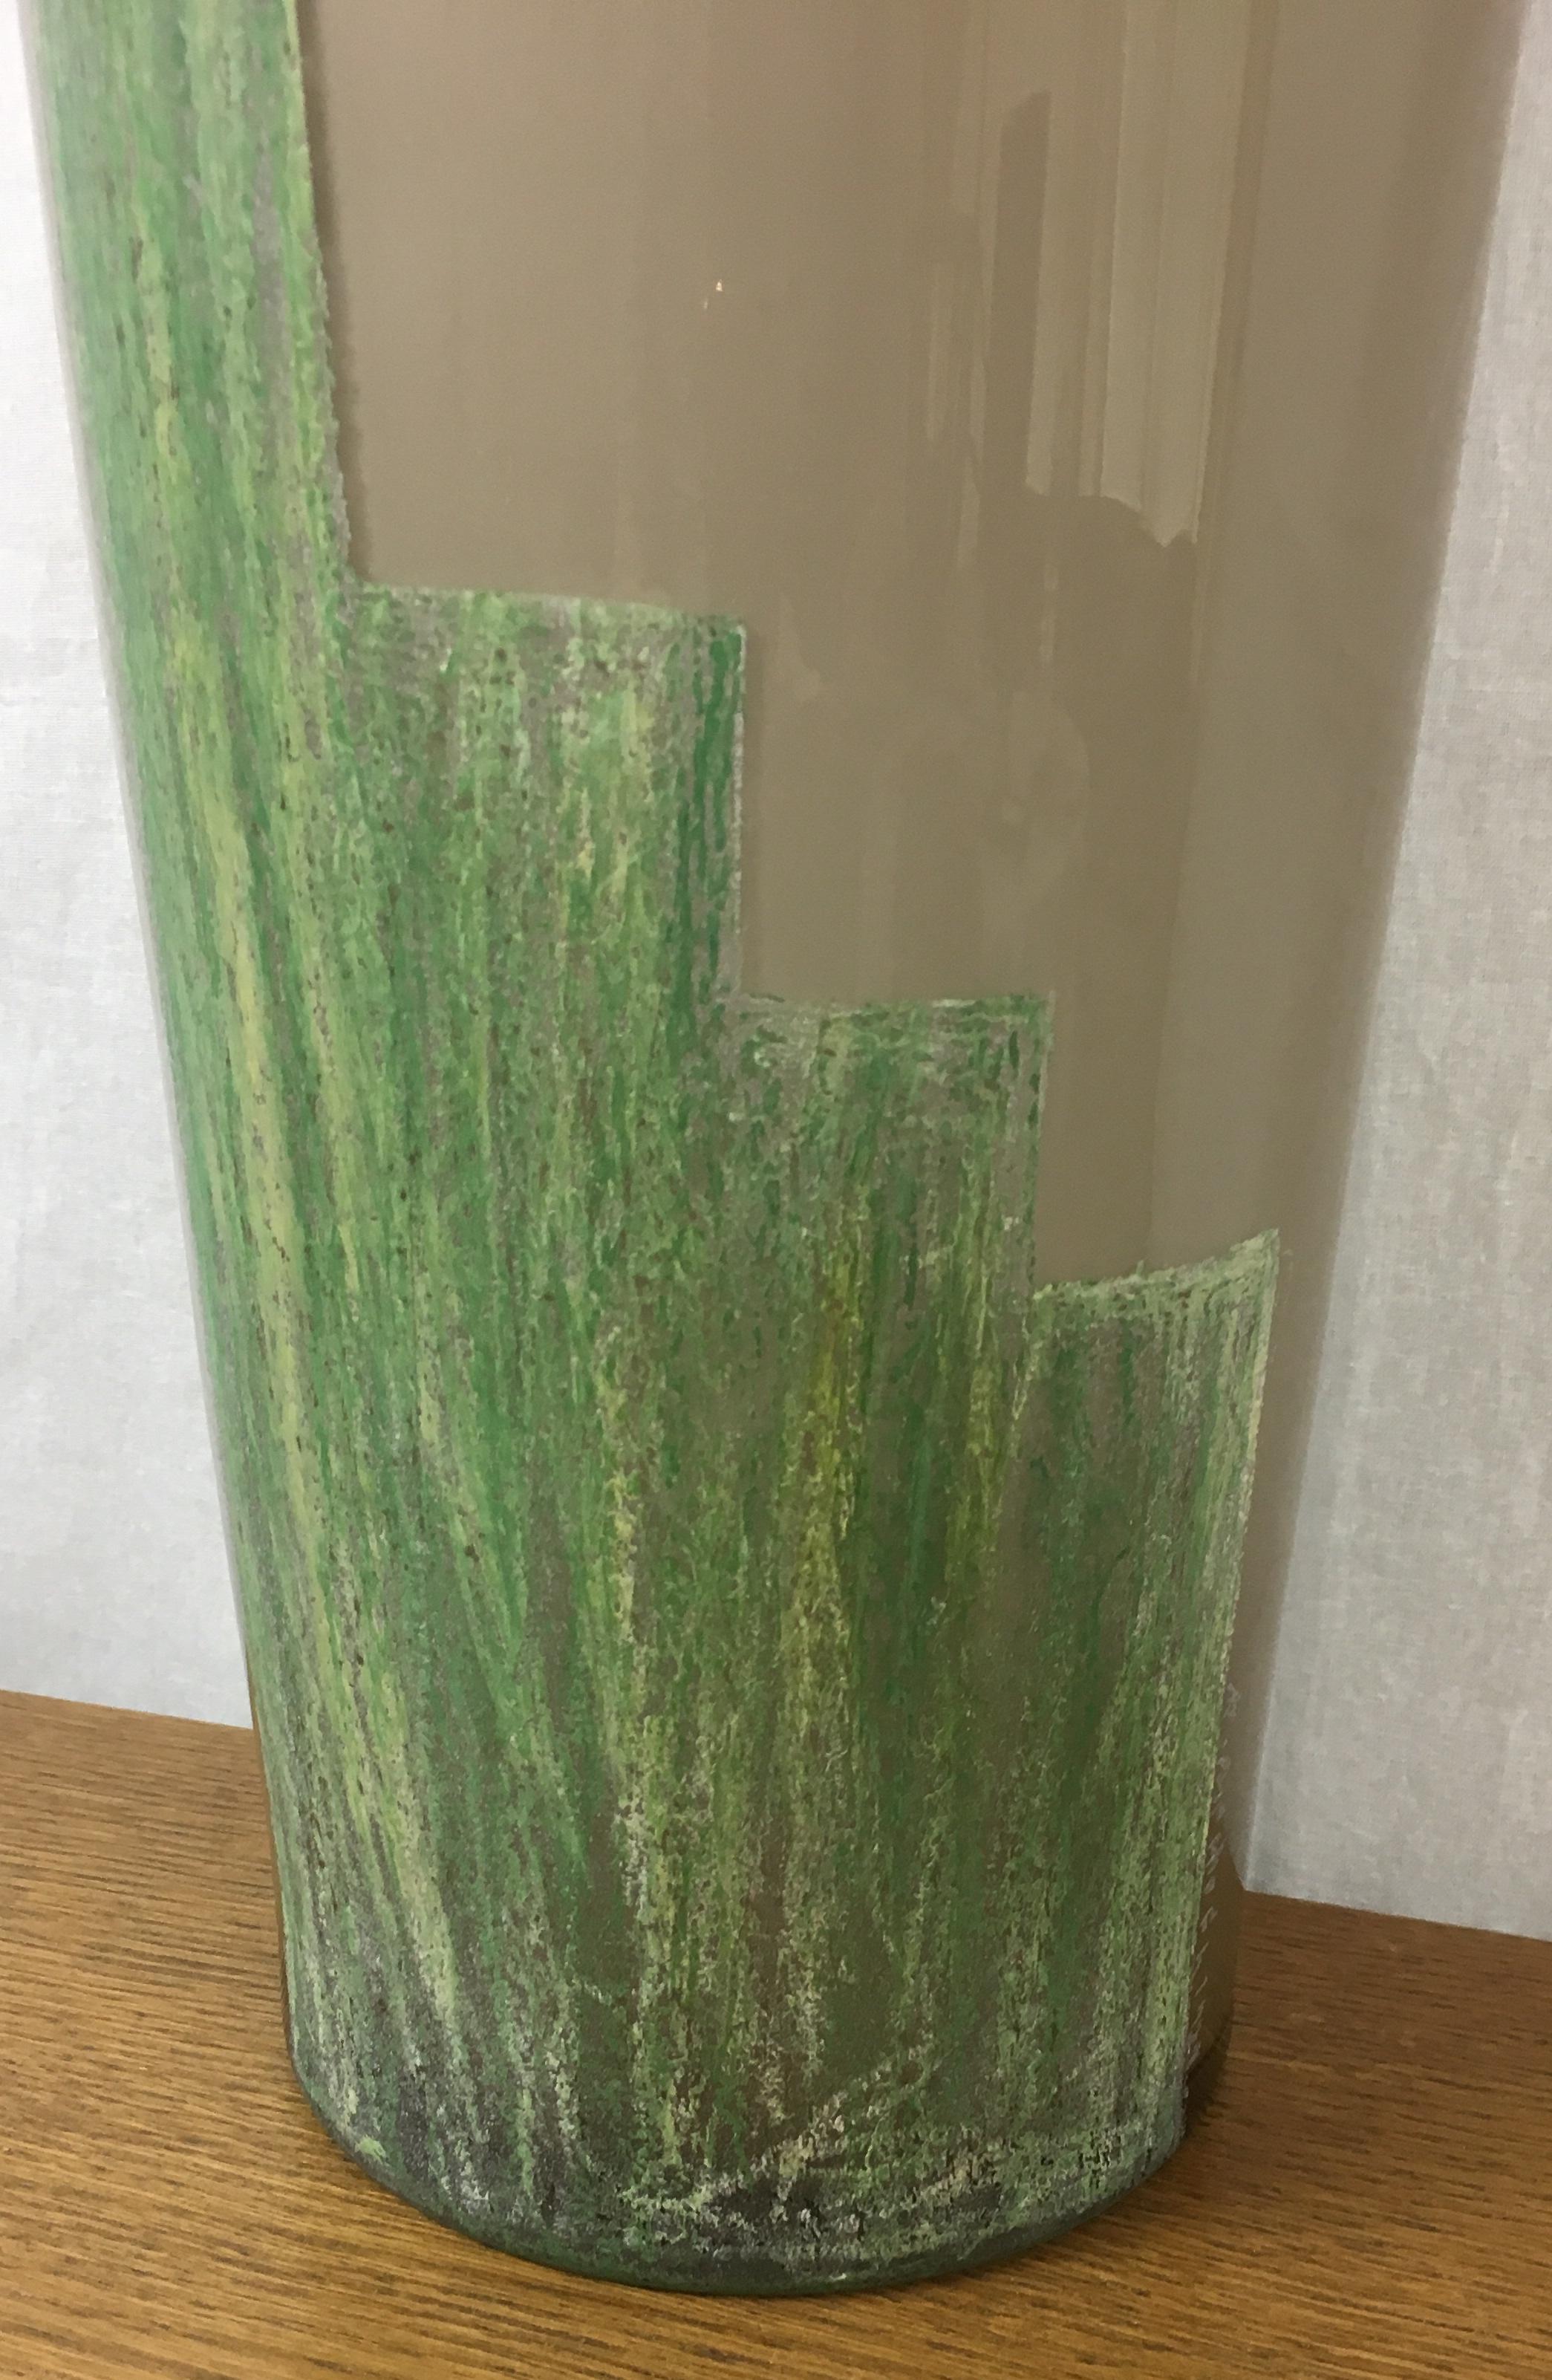 Art Deco Cubist Glass Floor Vase by Anatole Riecke, from La Coupole Brasserie For Sale 2